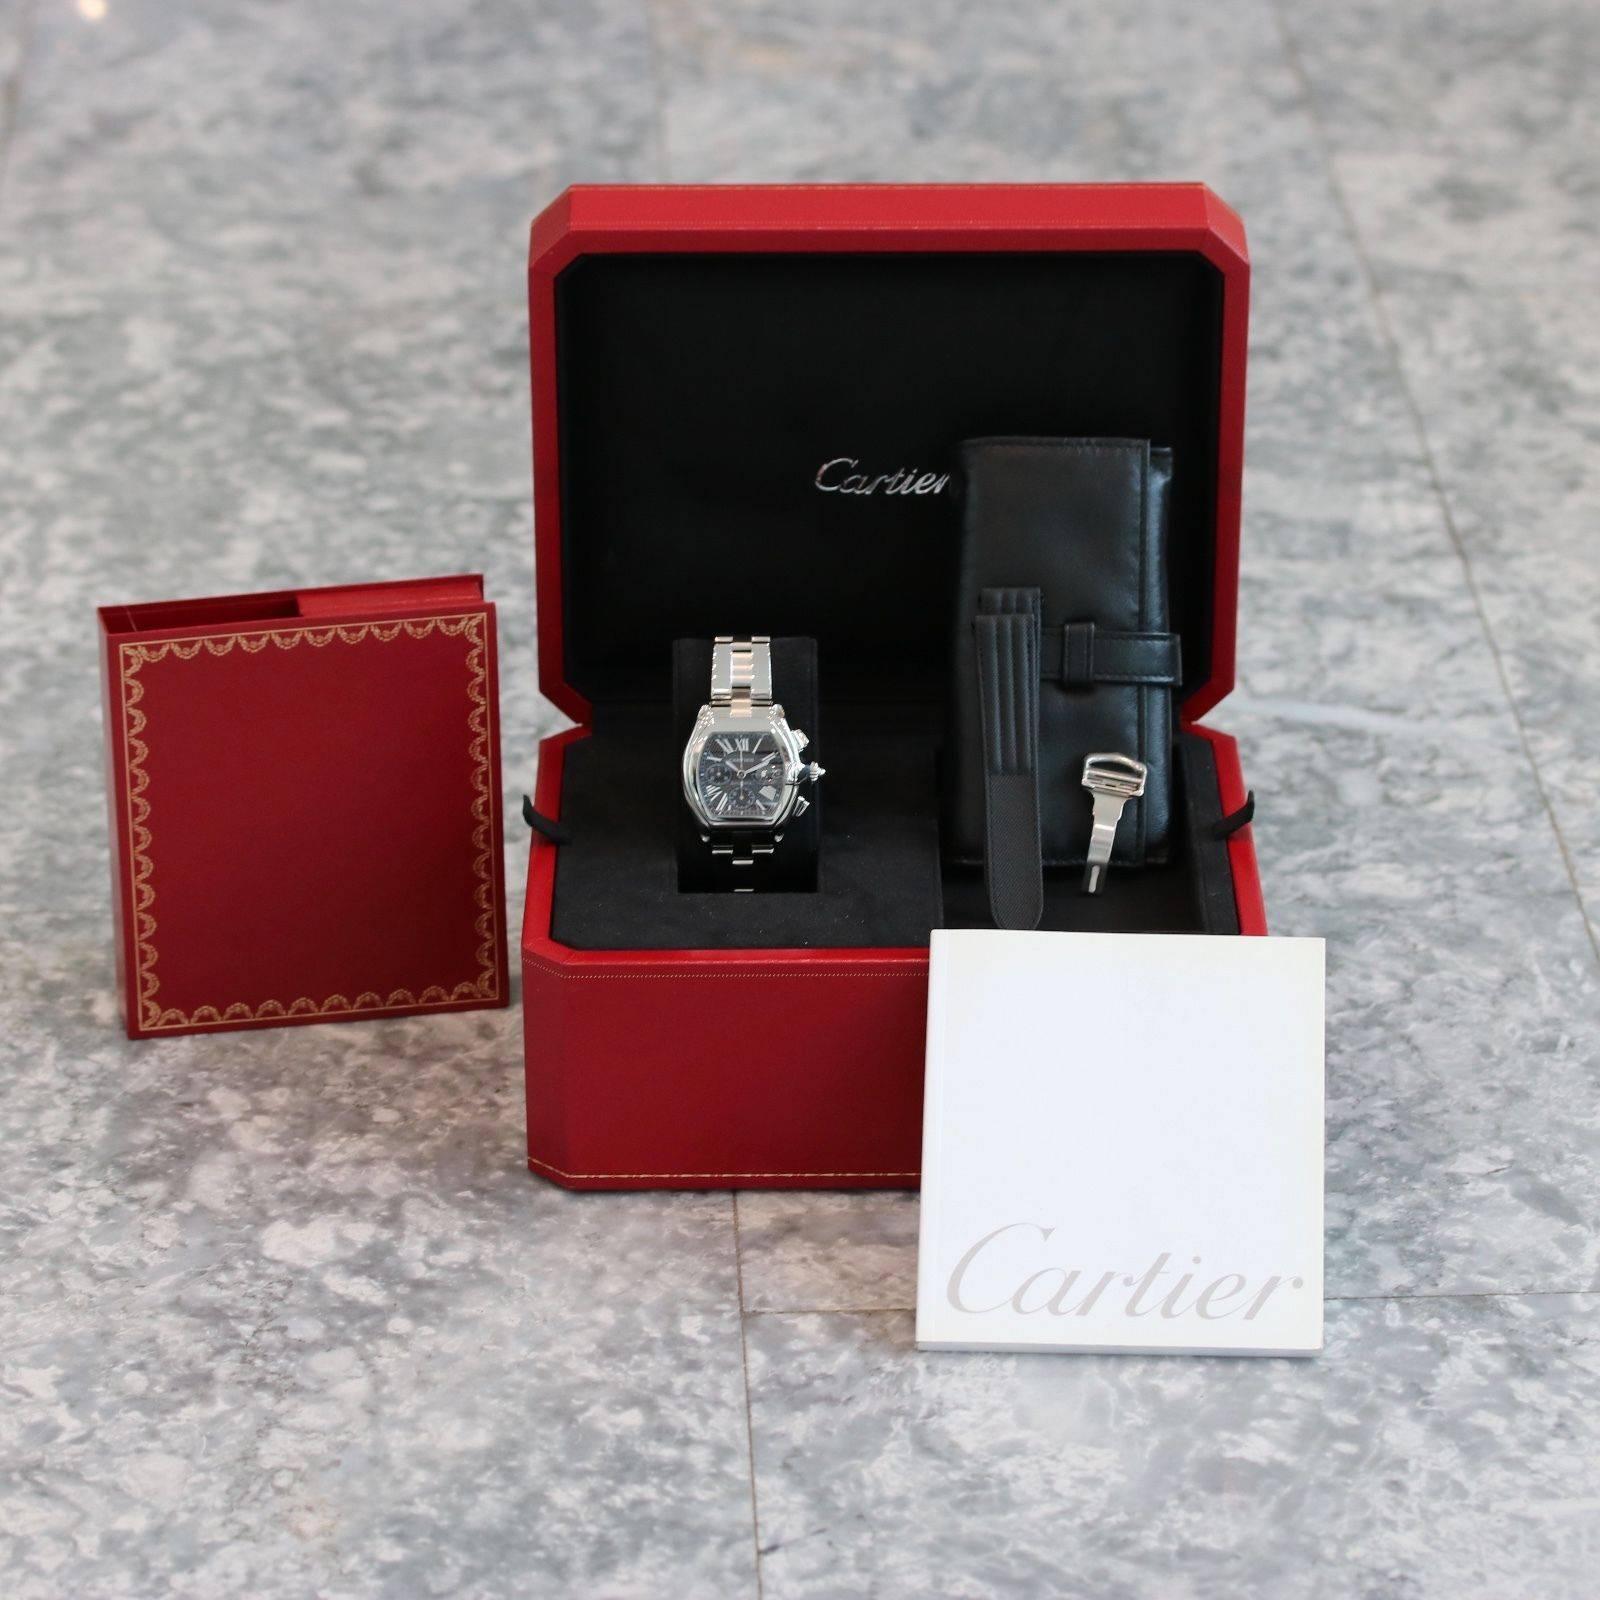 Cartier Stainless Steel Roadster Chronograph XL Black Dial Automatic Wristwatch 5